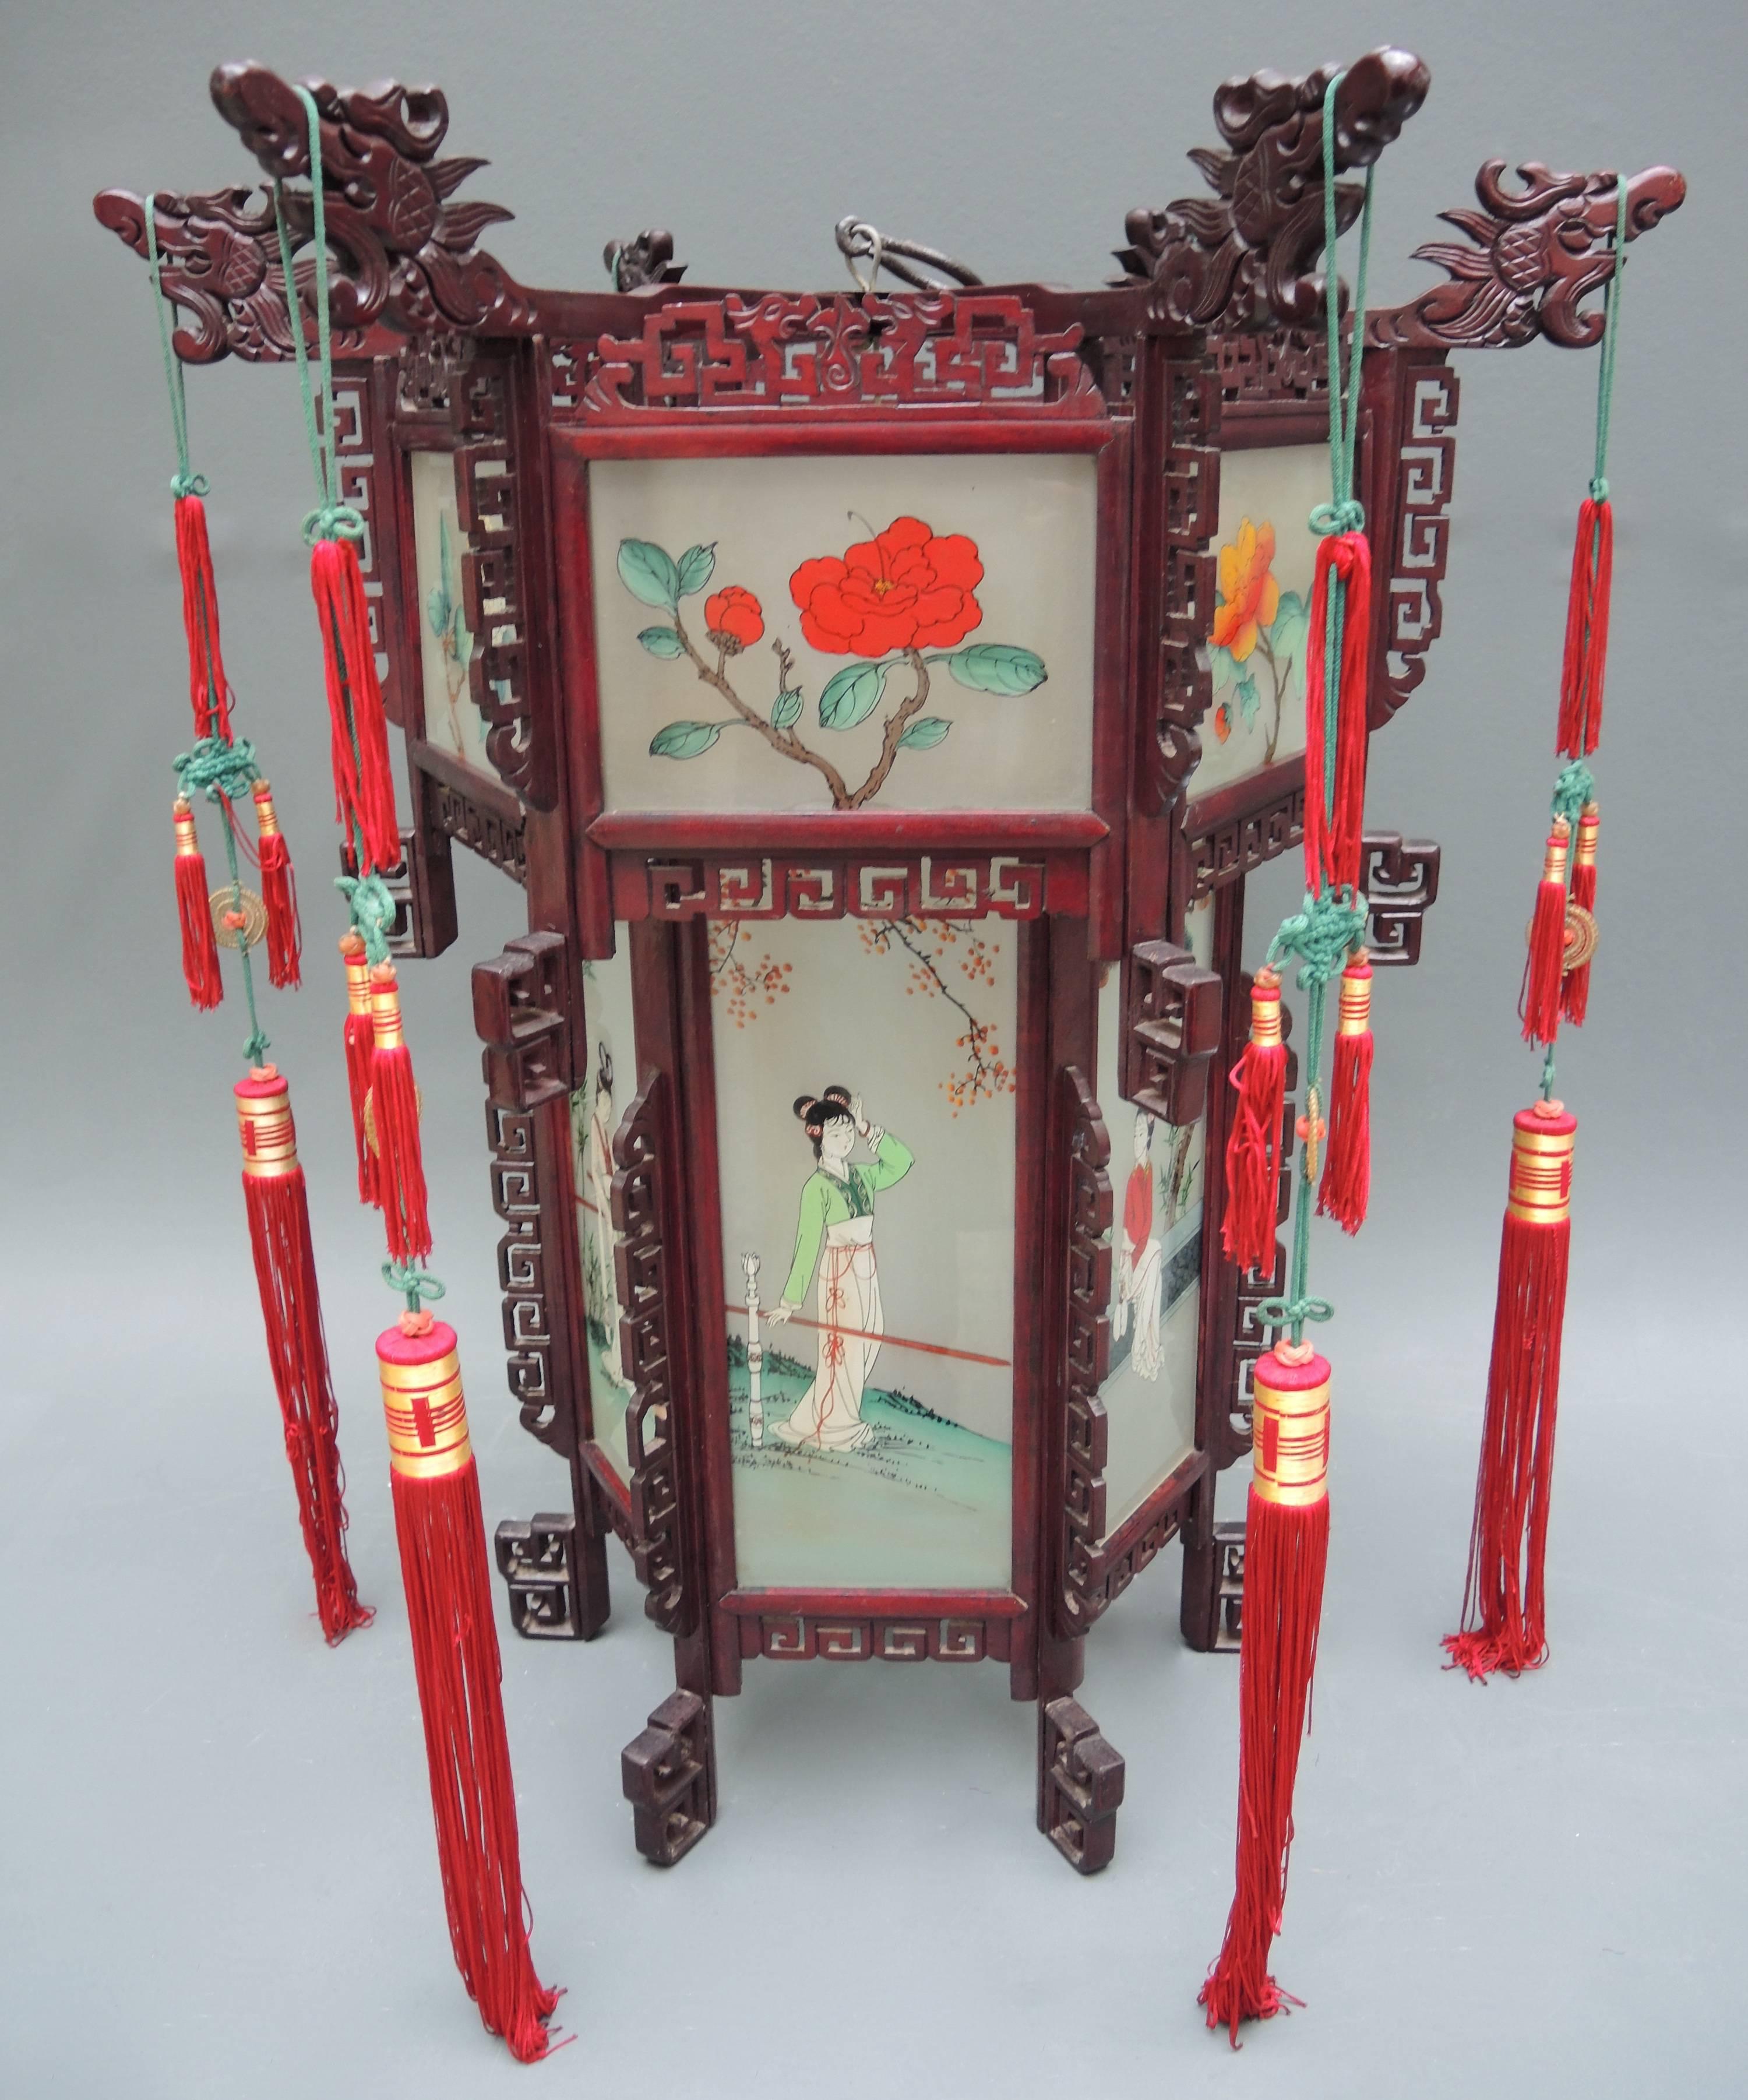 This large Chinese lantern retains all the original glass panels that have been reverse painted by hand on the glass. No breaks or missing pieces truly a rare finds!
The lantern was made in the 1940s and includes the red and green knotted tassels